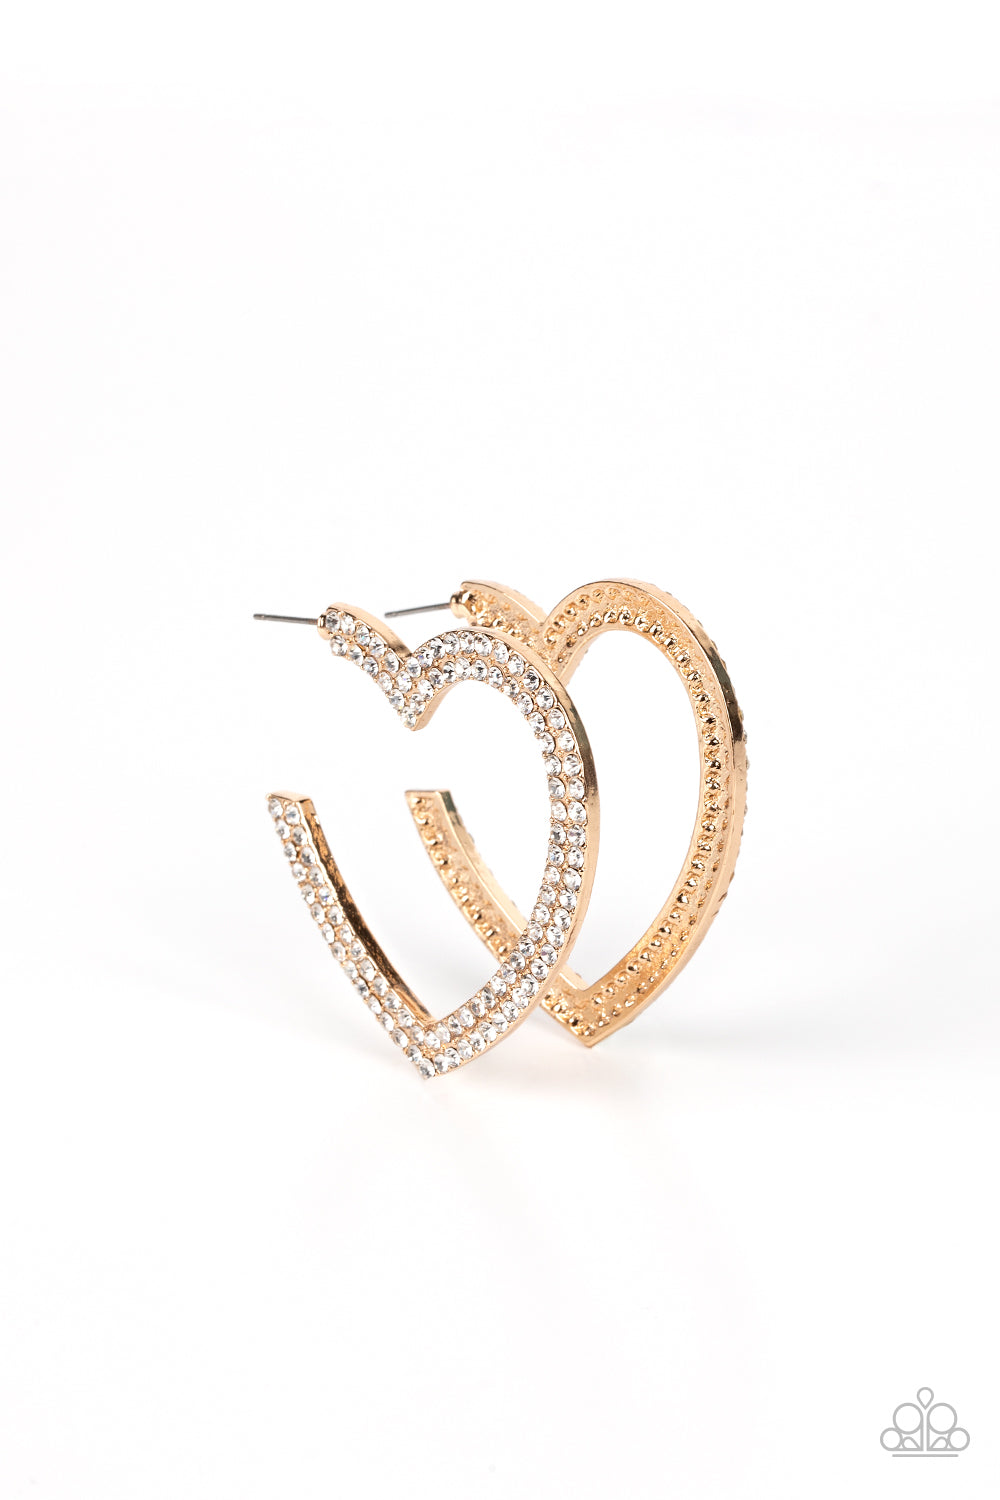 AMORE to Love - Gold Paparazzi Earring